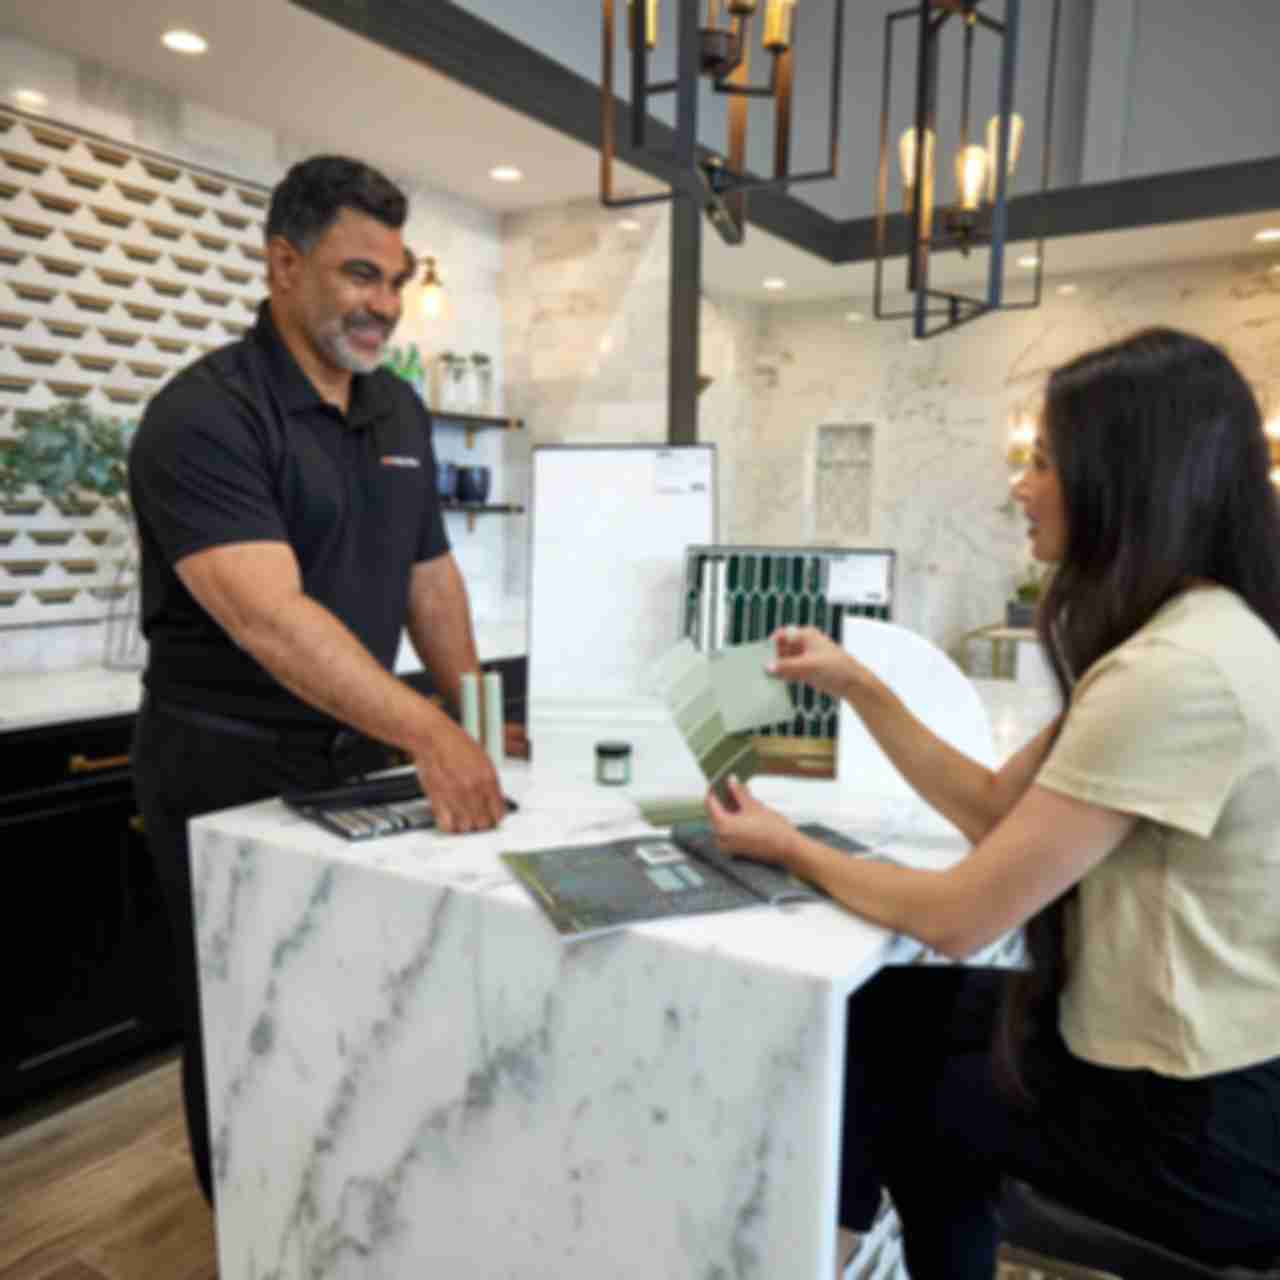 A tile expert provides a design consultation to a customer.